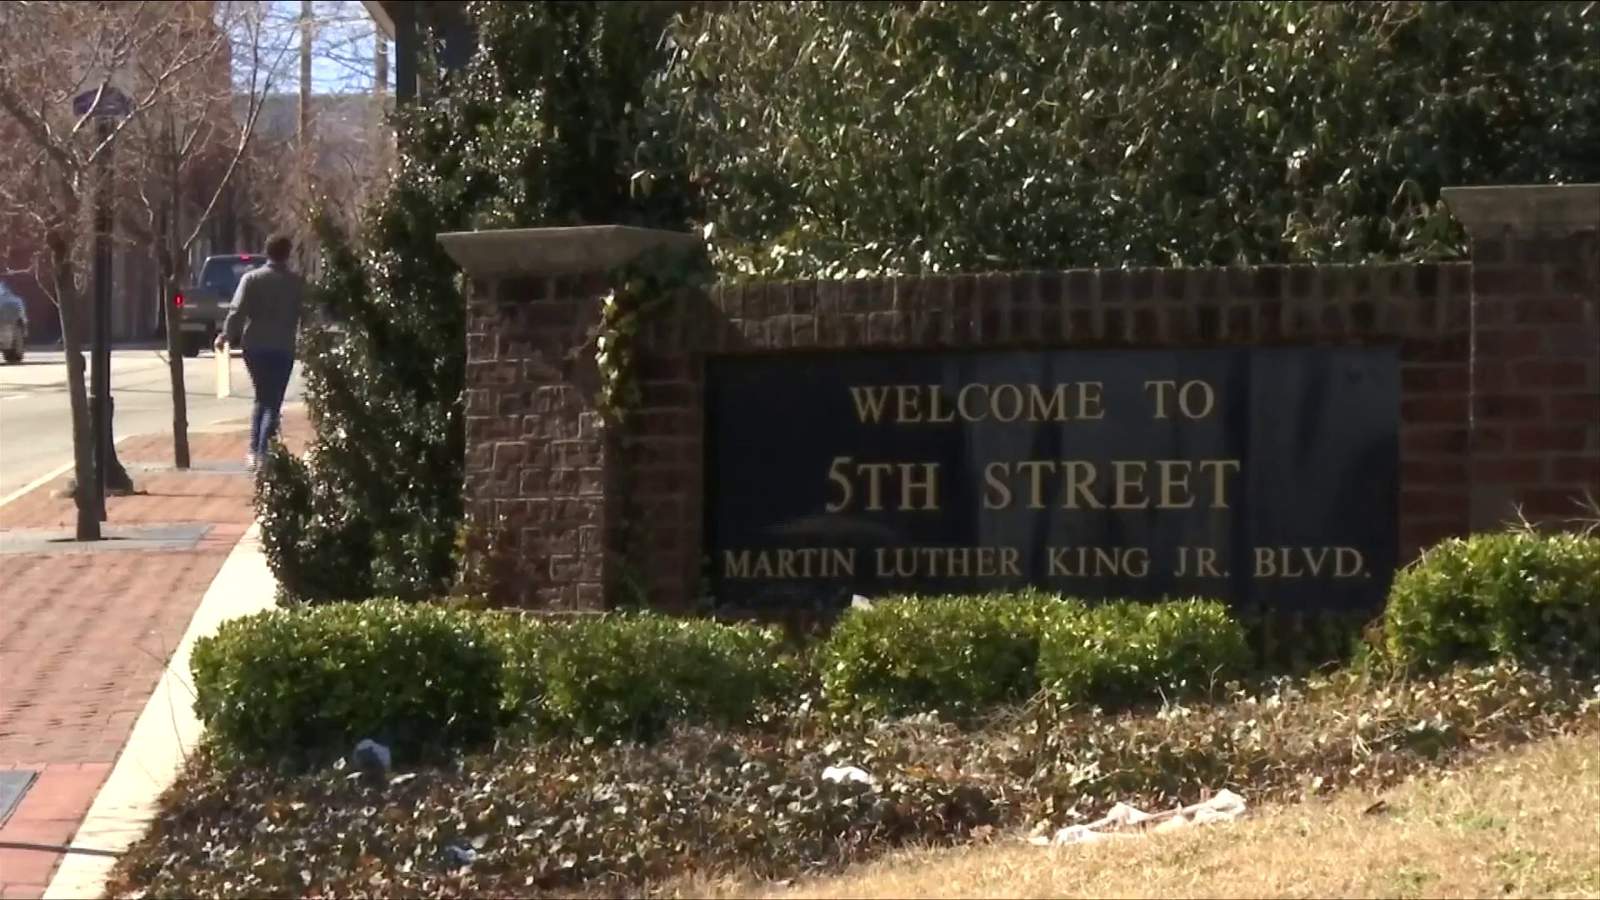 Lynchburg City Council considers renaming busy road after Martin Luther King Jr.